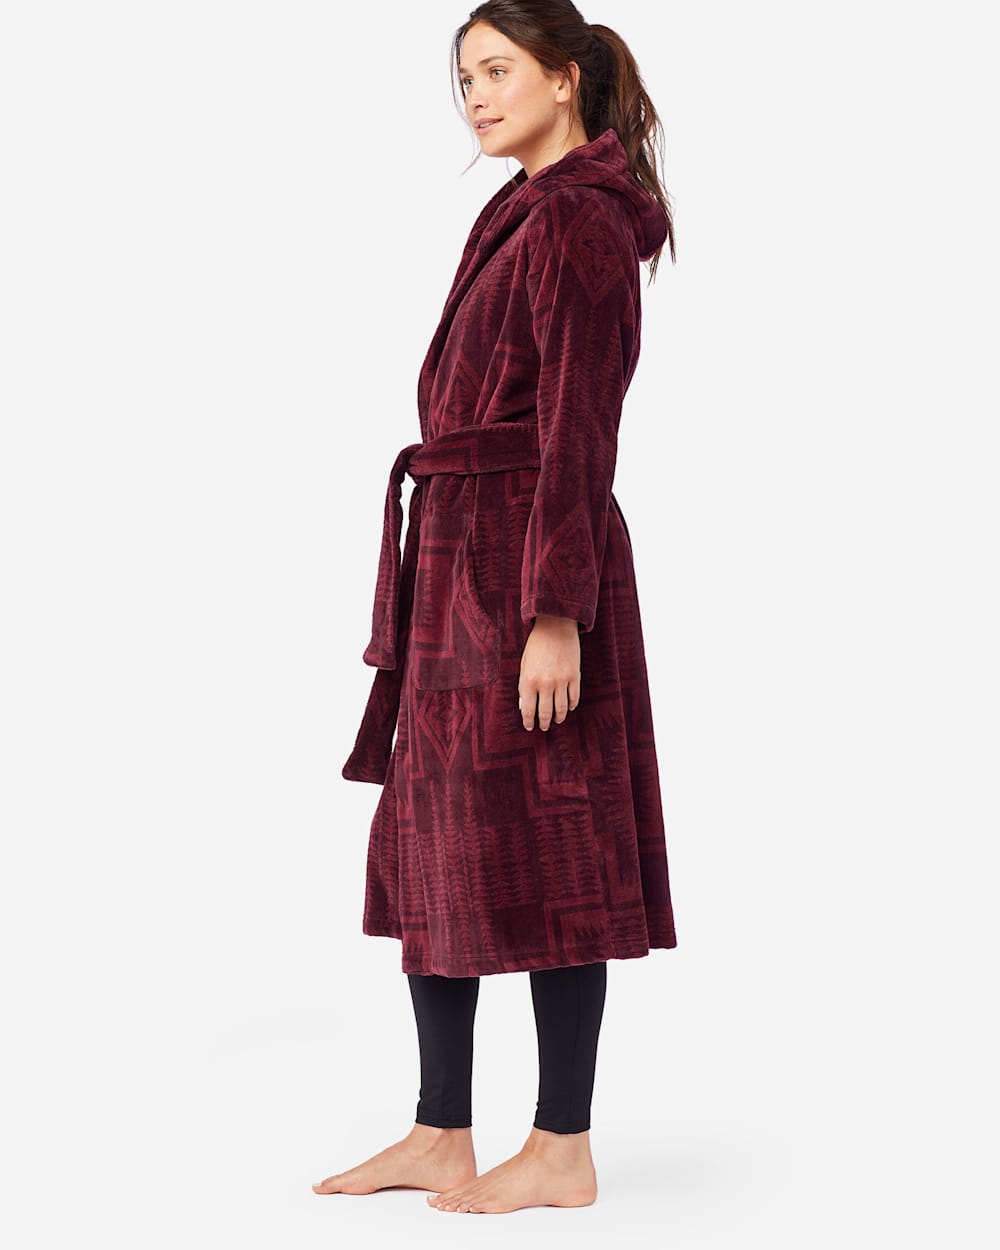 ALTERNATE VIEW OF WOMEN'S JACQUARD TERRY ROBE IN BURGUNDY HARDING image number 2